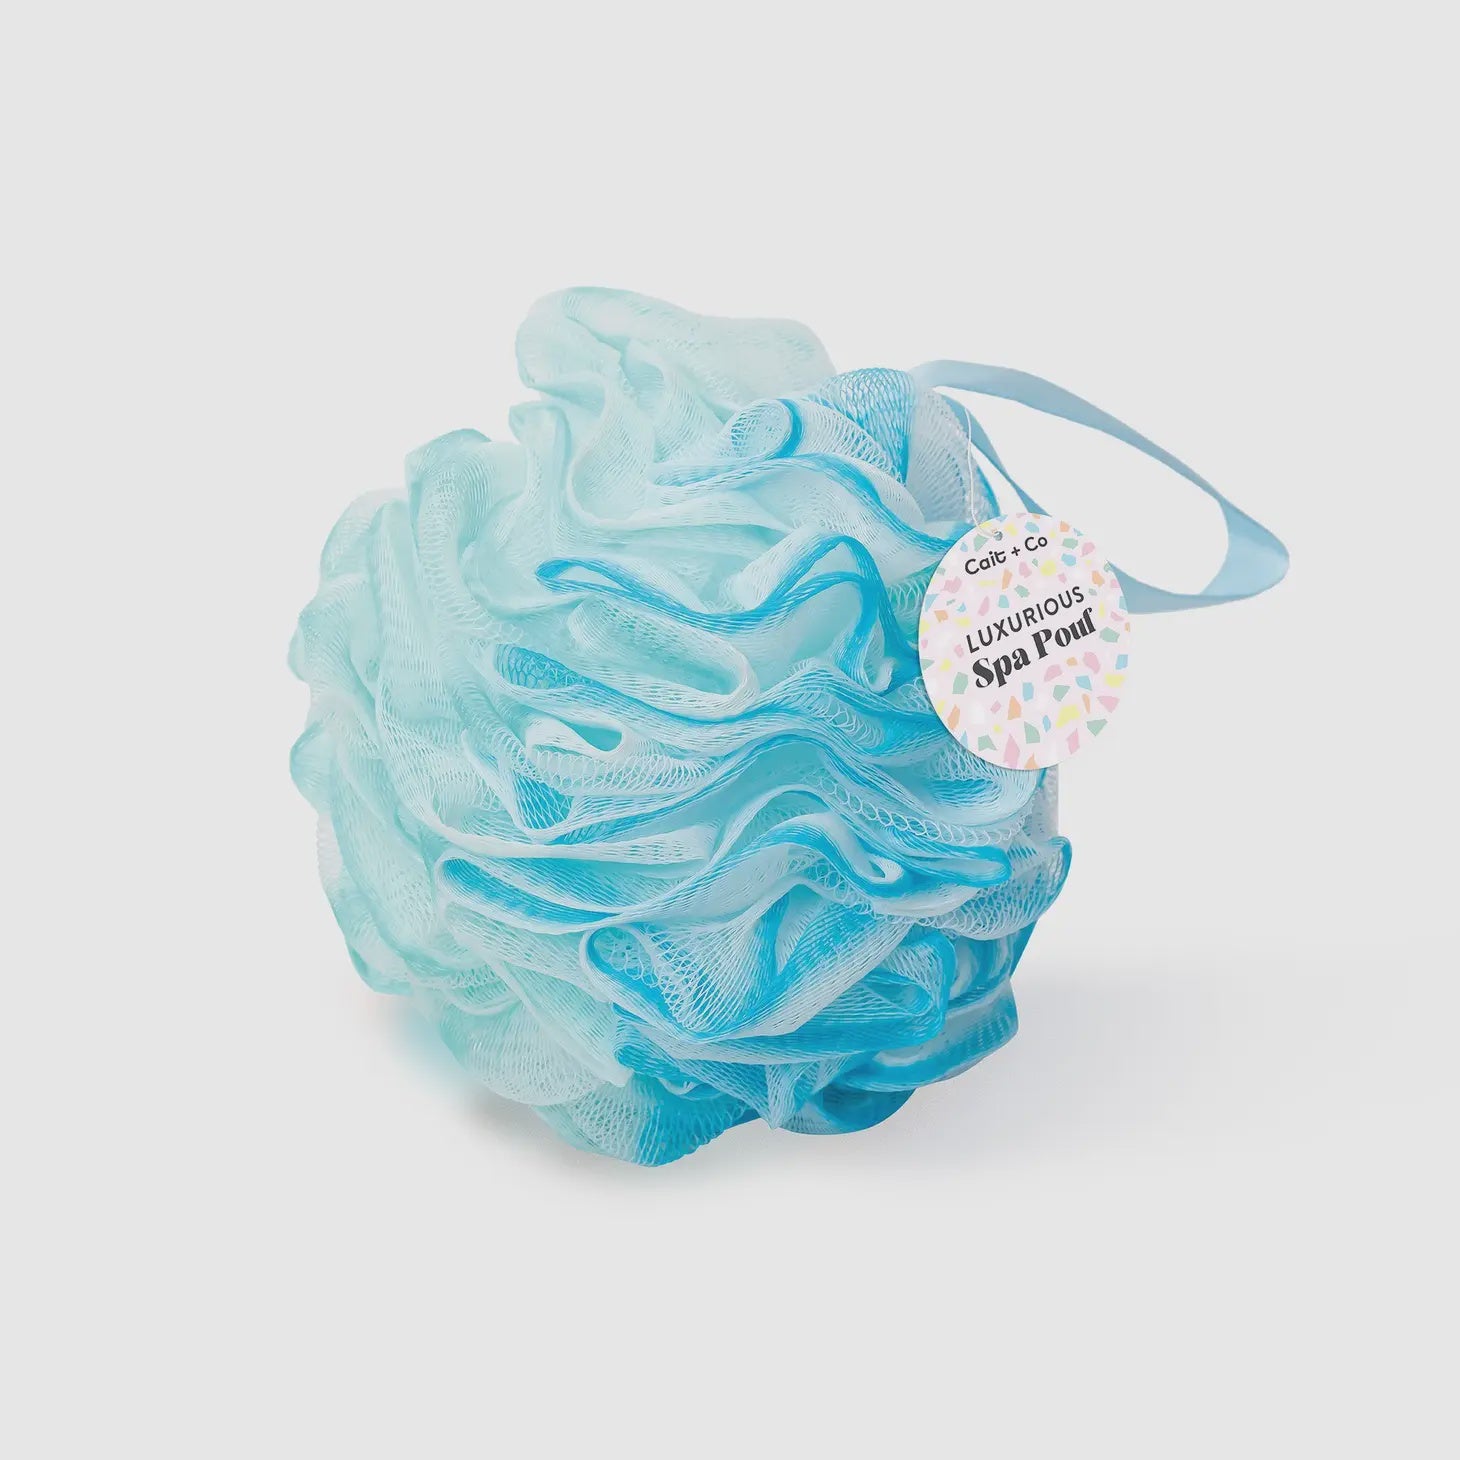 Gem Luxurious Spa Pouf Blue Mint and White